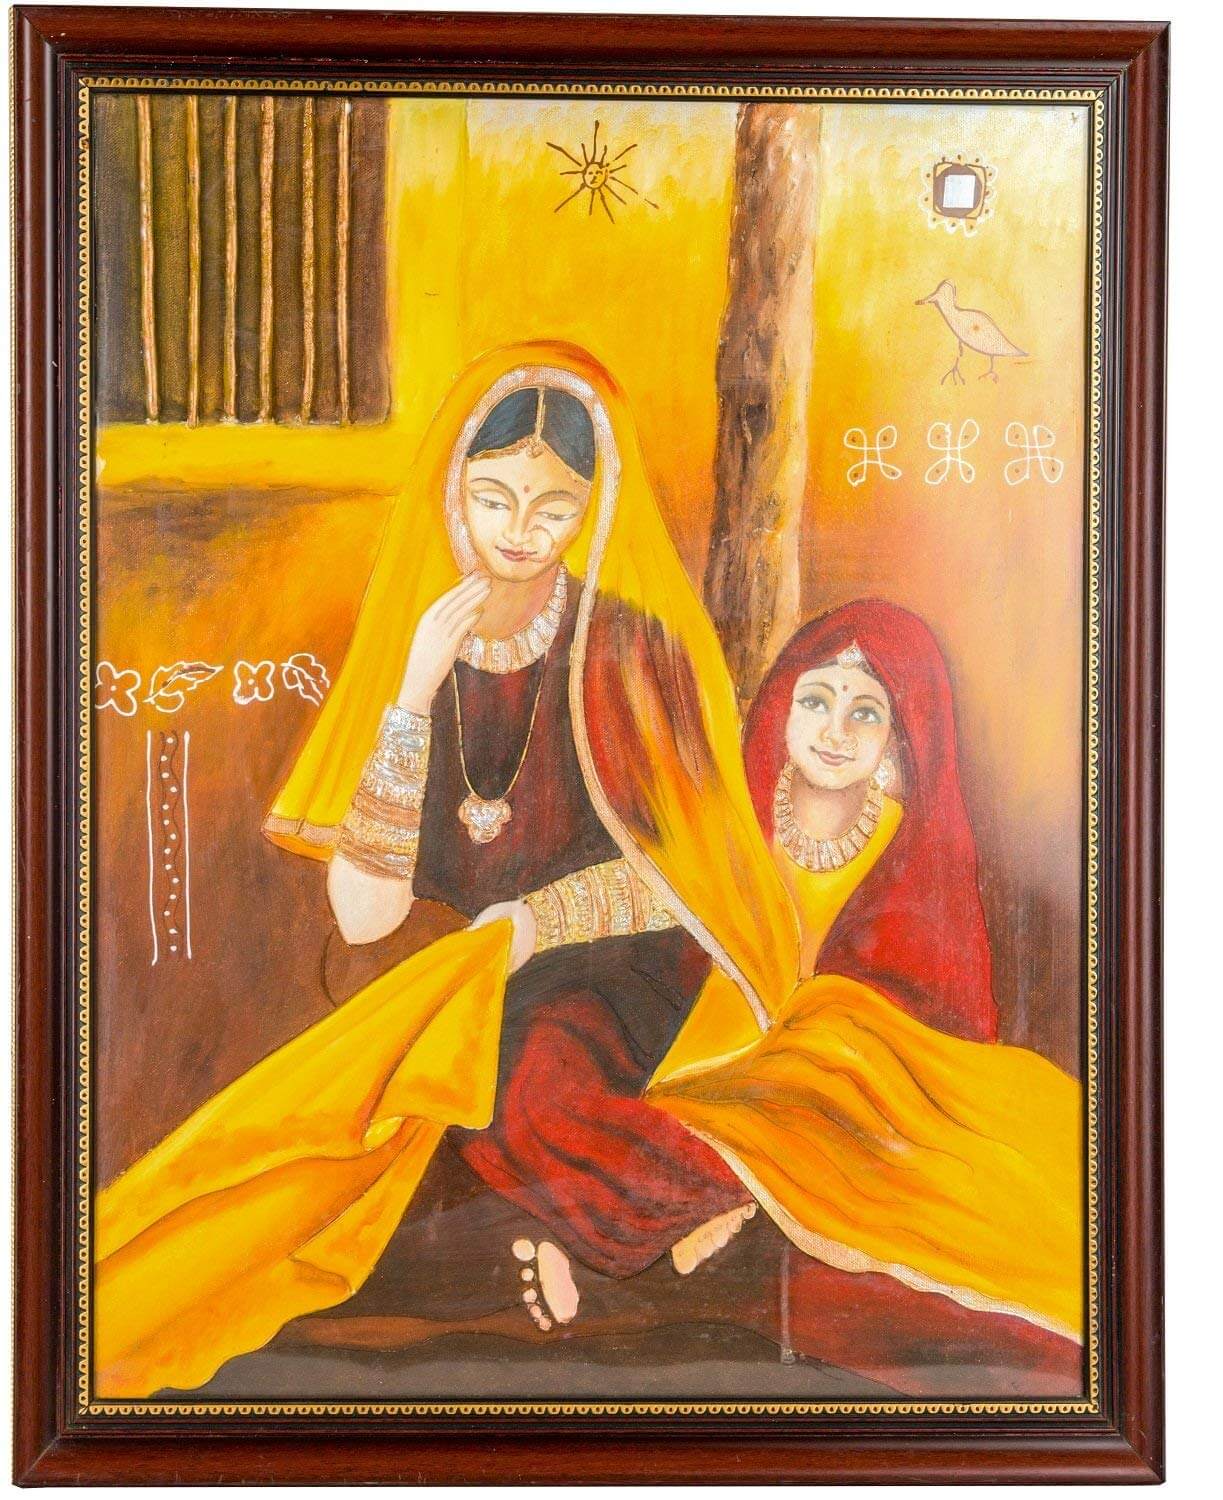 2 Ladies Wall Decor Without Glass Canvas Oil Painting